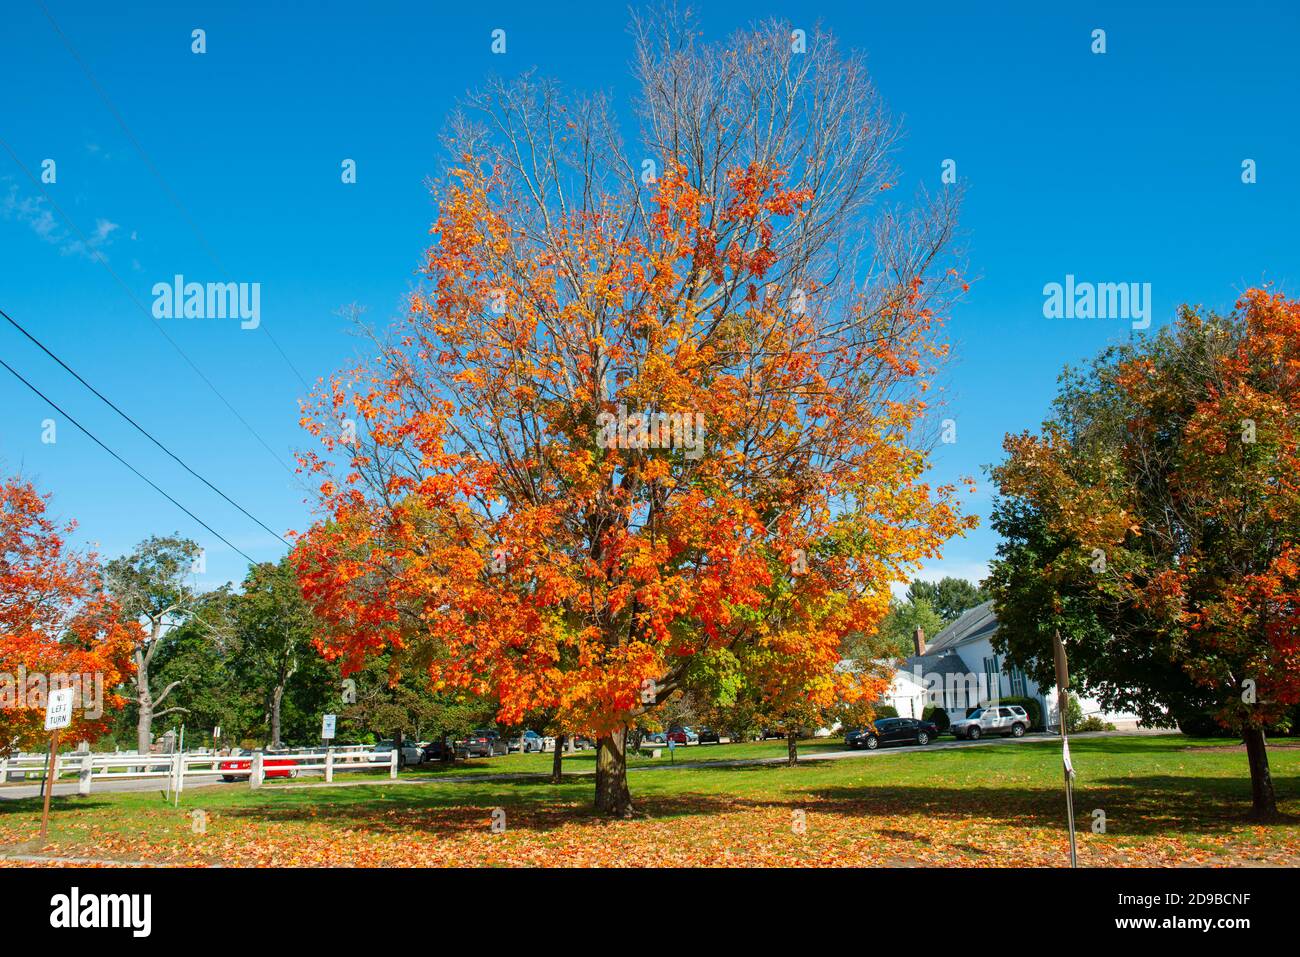 Last Rest Cemetery and trees with fall foliage in Merrimack, New Hampshire, NH, USA. Stock Photo